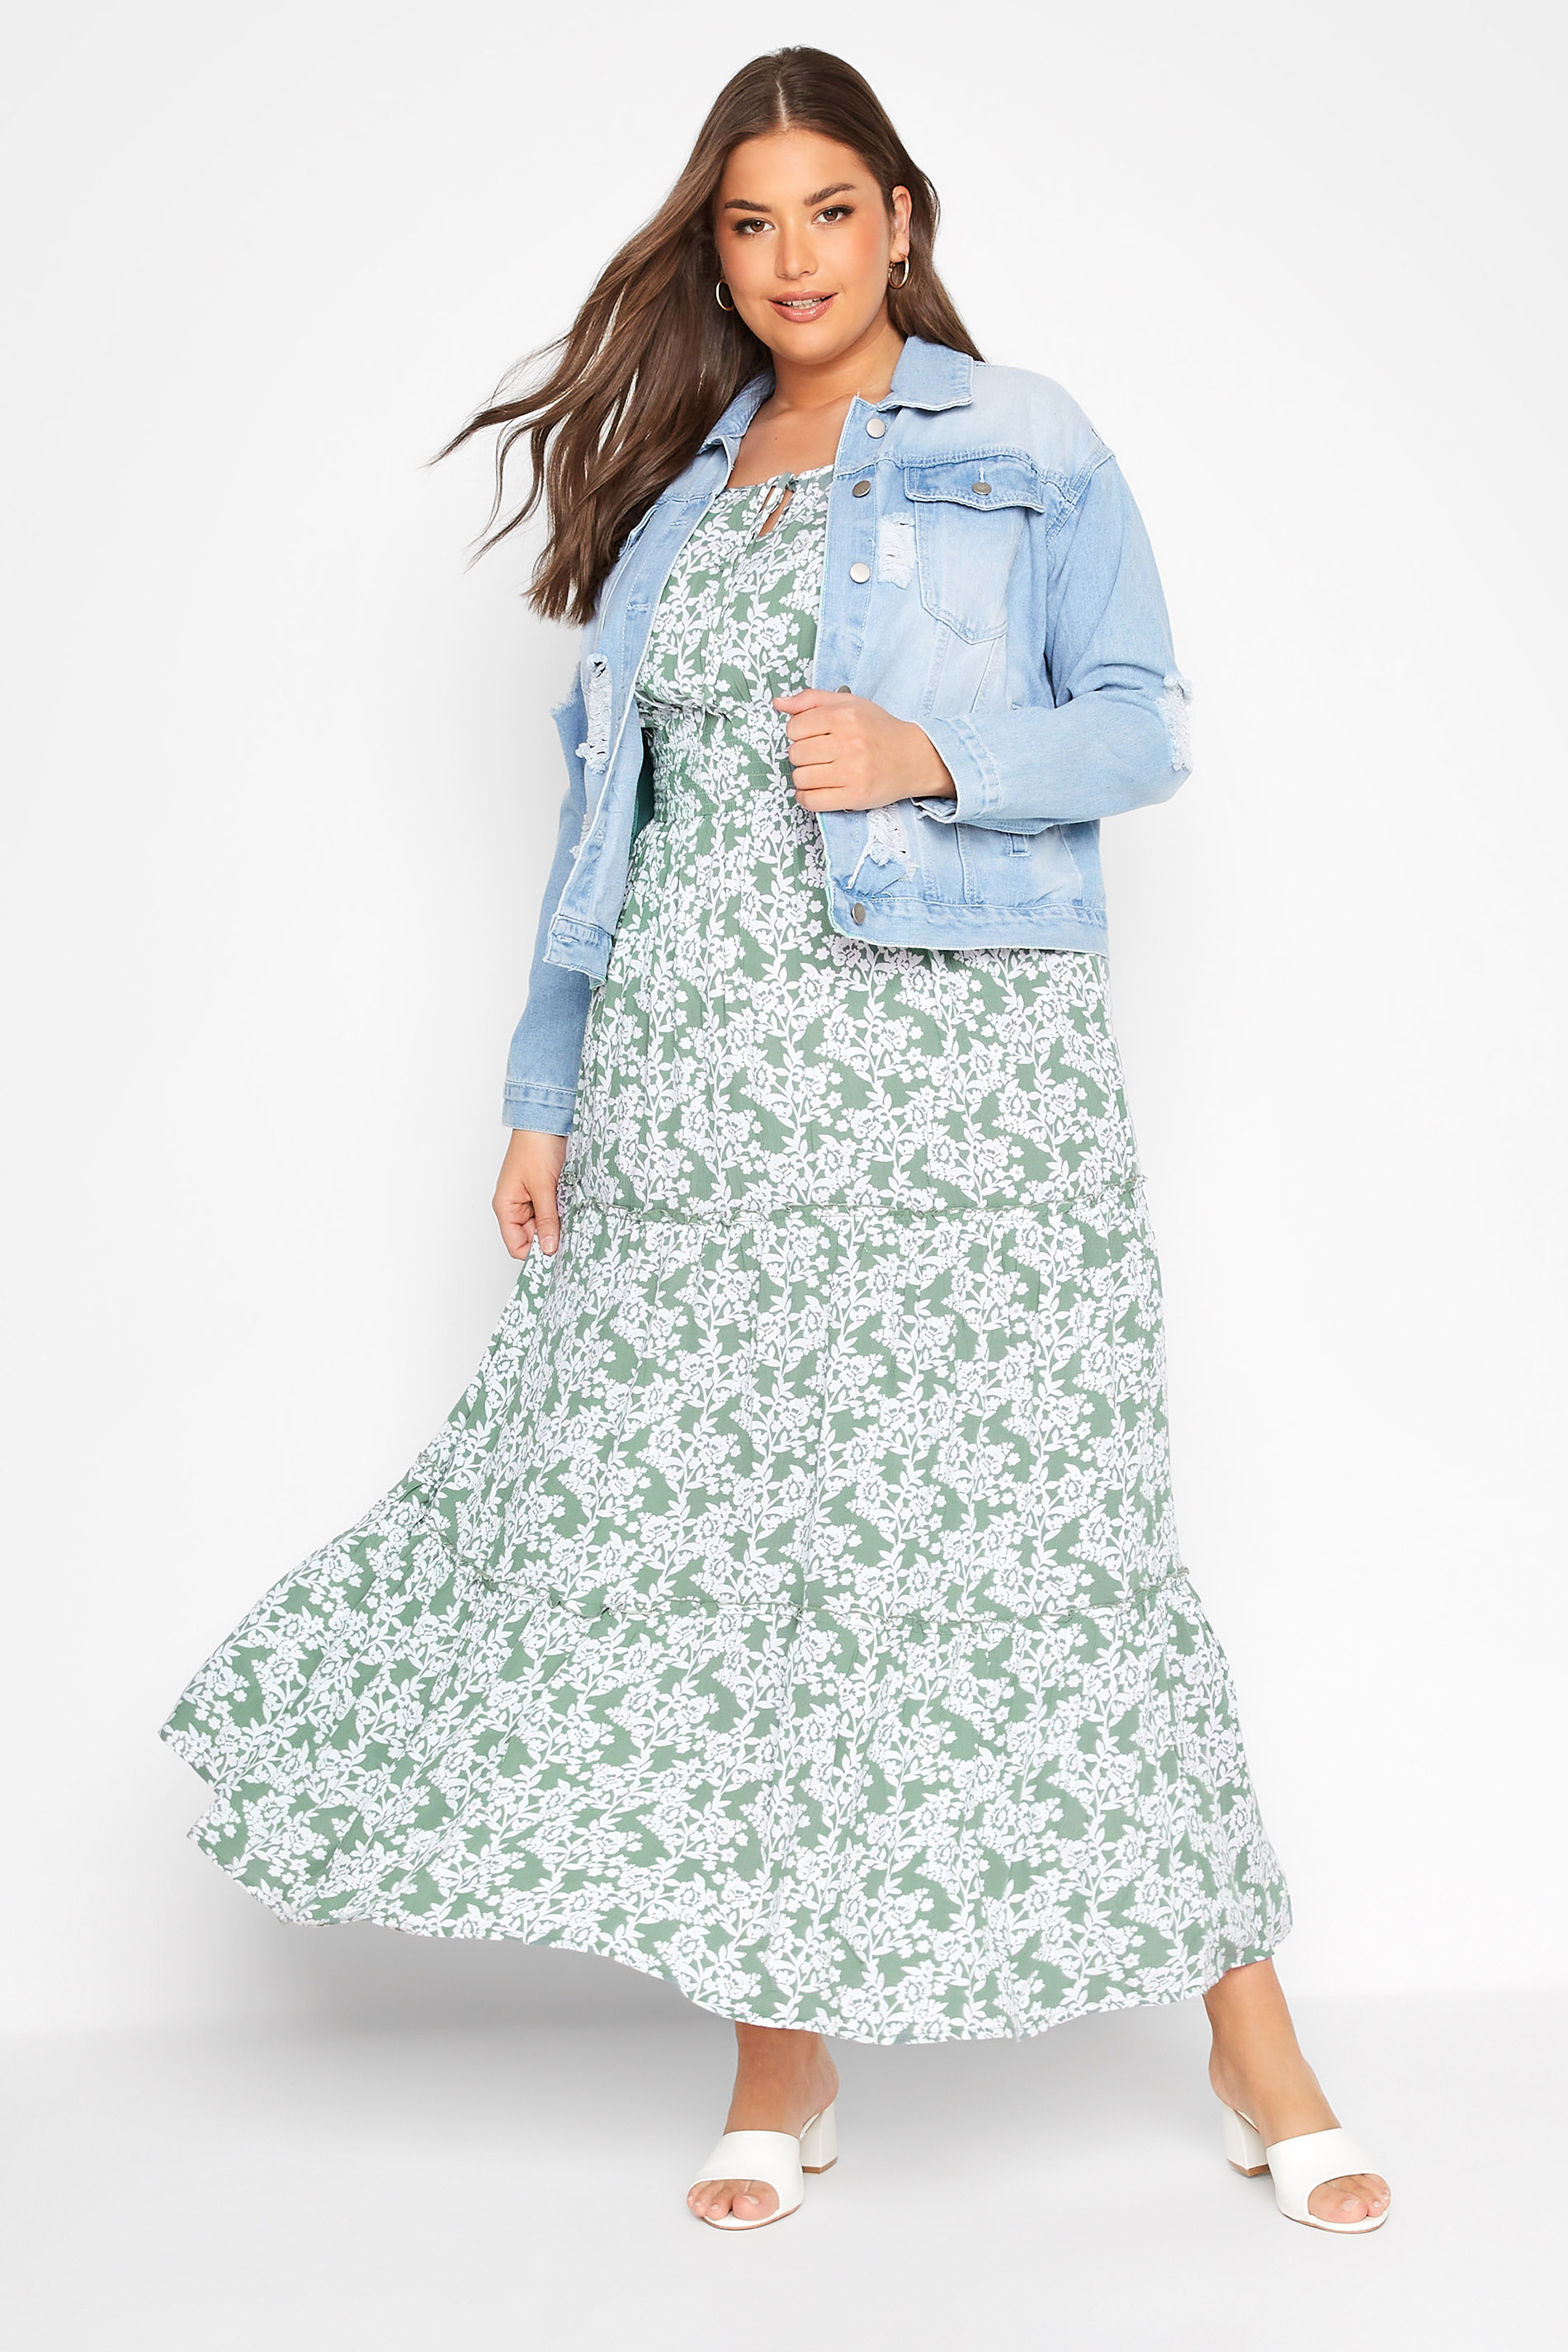 Robes Grande Taille Grande taille  Robes Longues | Robe Verte Pistache Floral Manches Courtes - XC71872